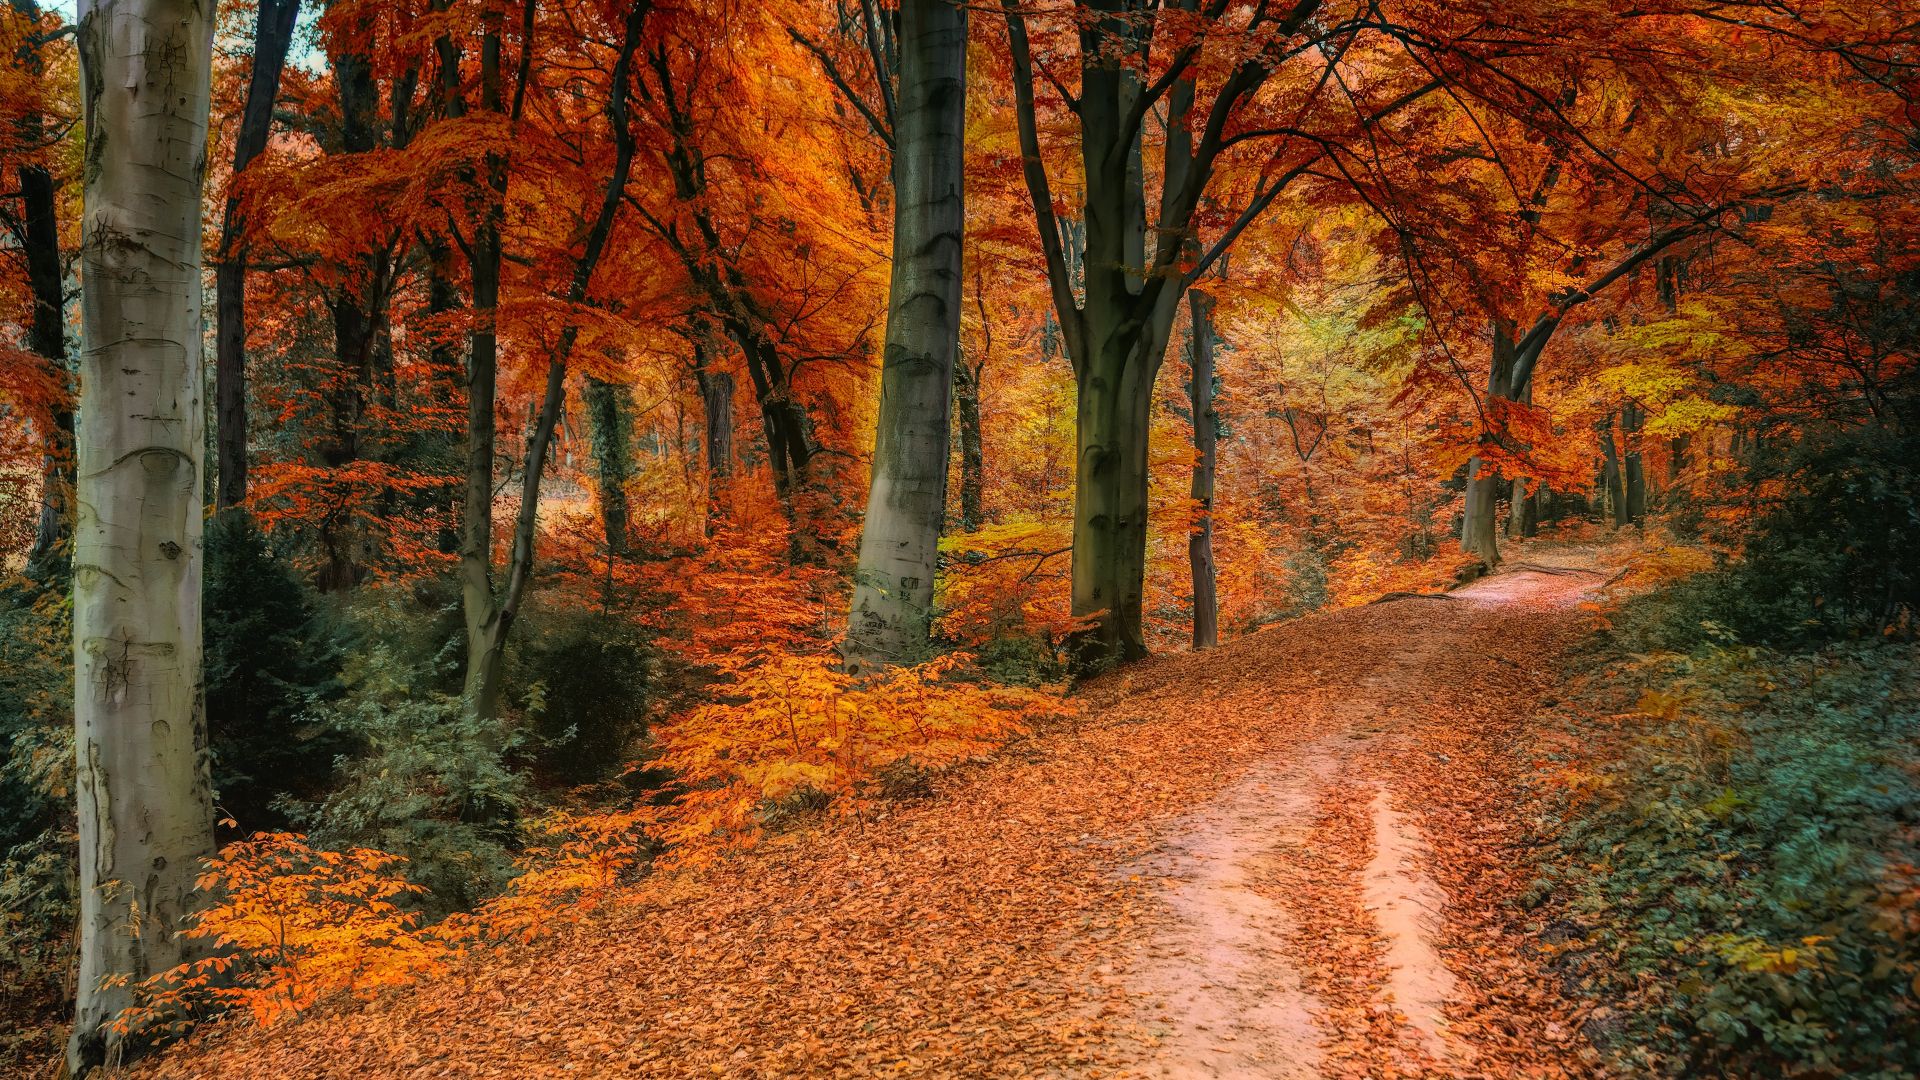 Download 1920x1080 wallpaper autumn, tree, fall, pathway, full hd, hdtv, fhd, 1080p, 1920x1080 HD image, background, 15890